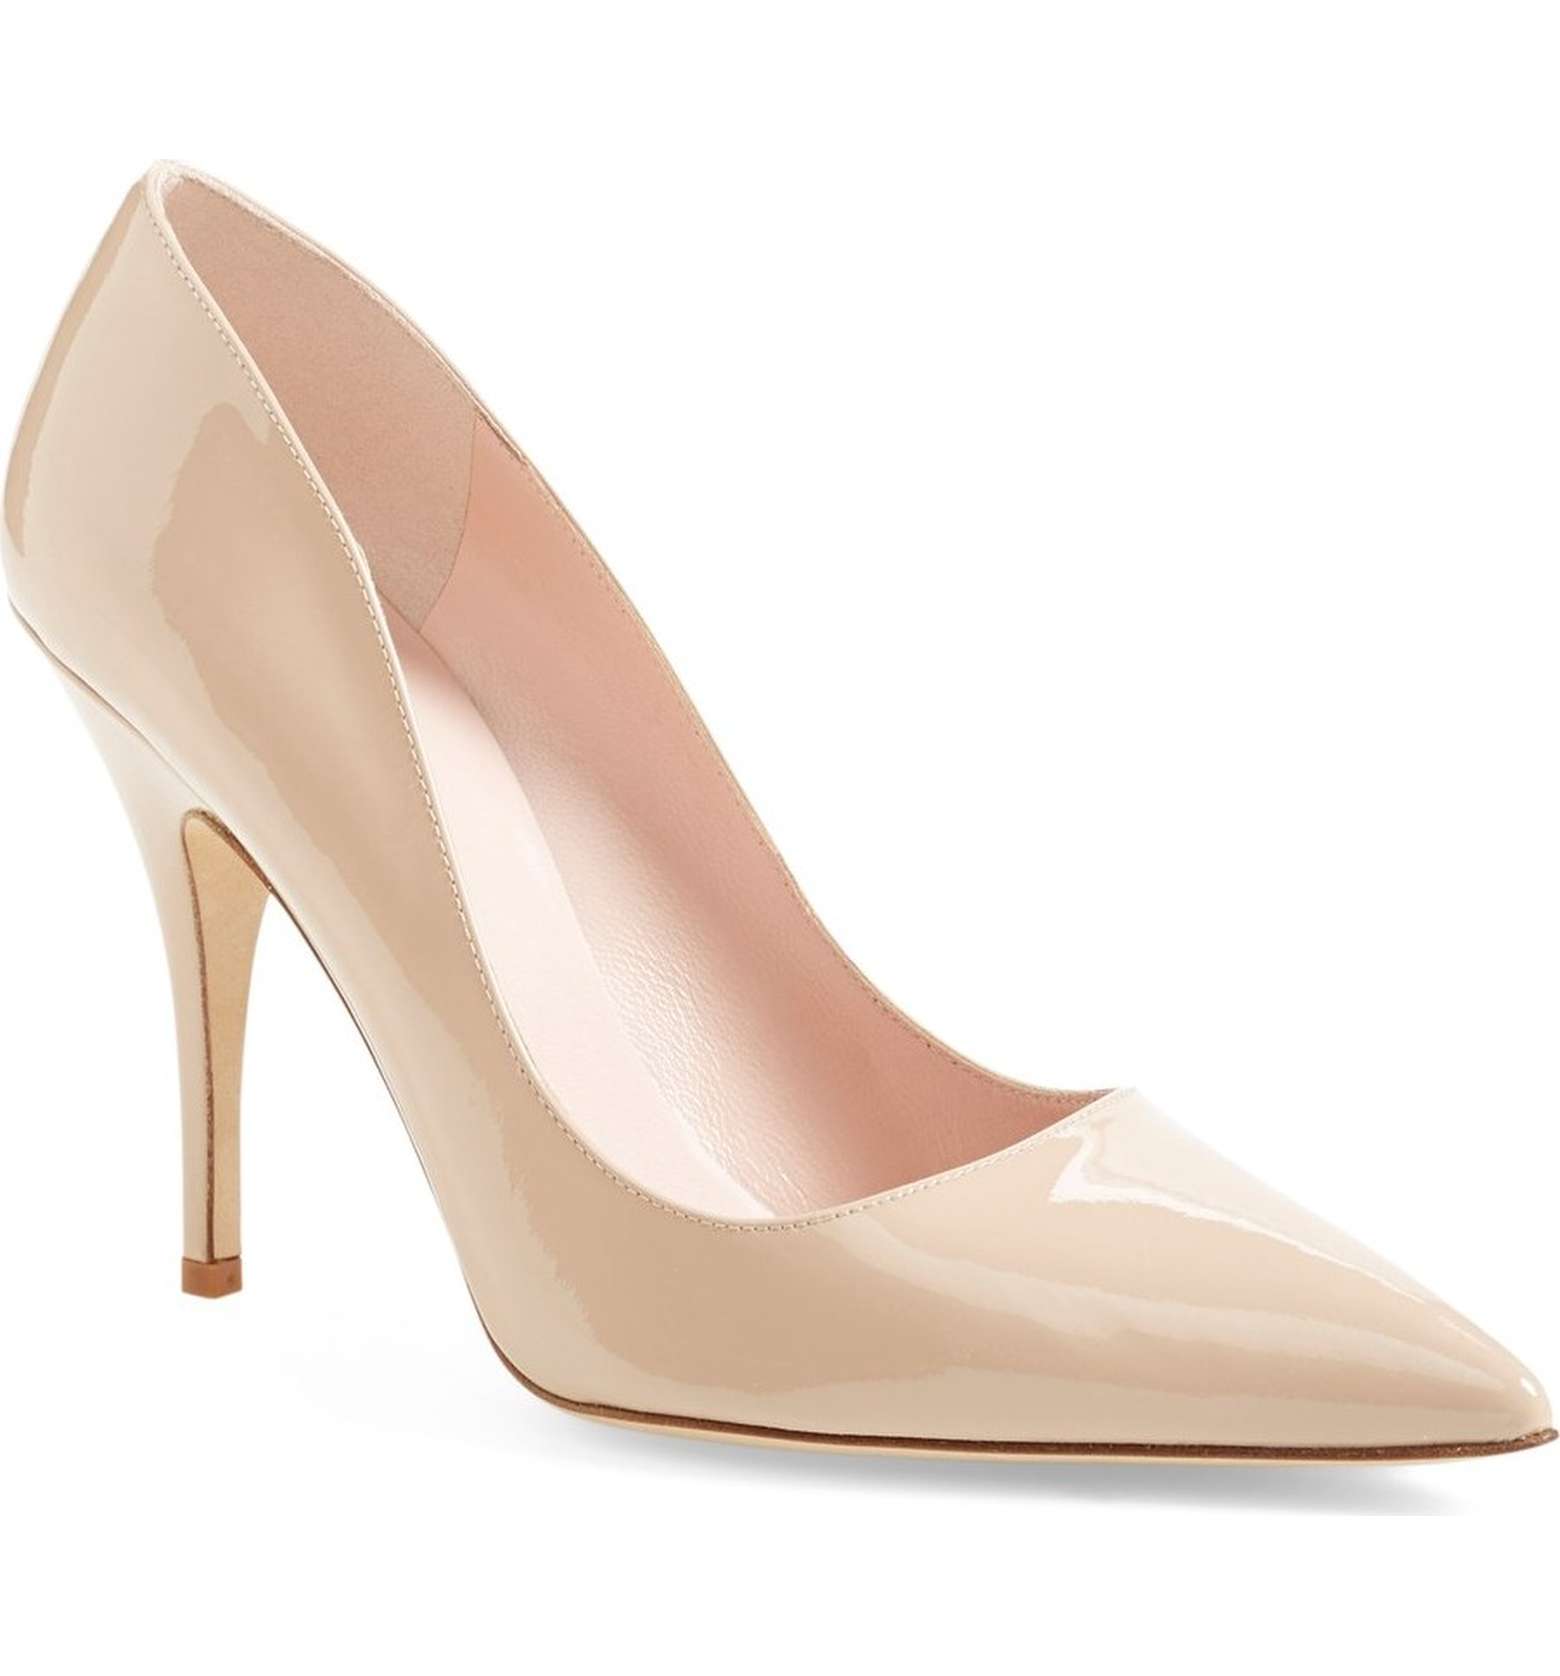 Business Style Kate Spade New York Nude Patent Heels